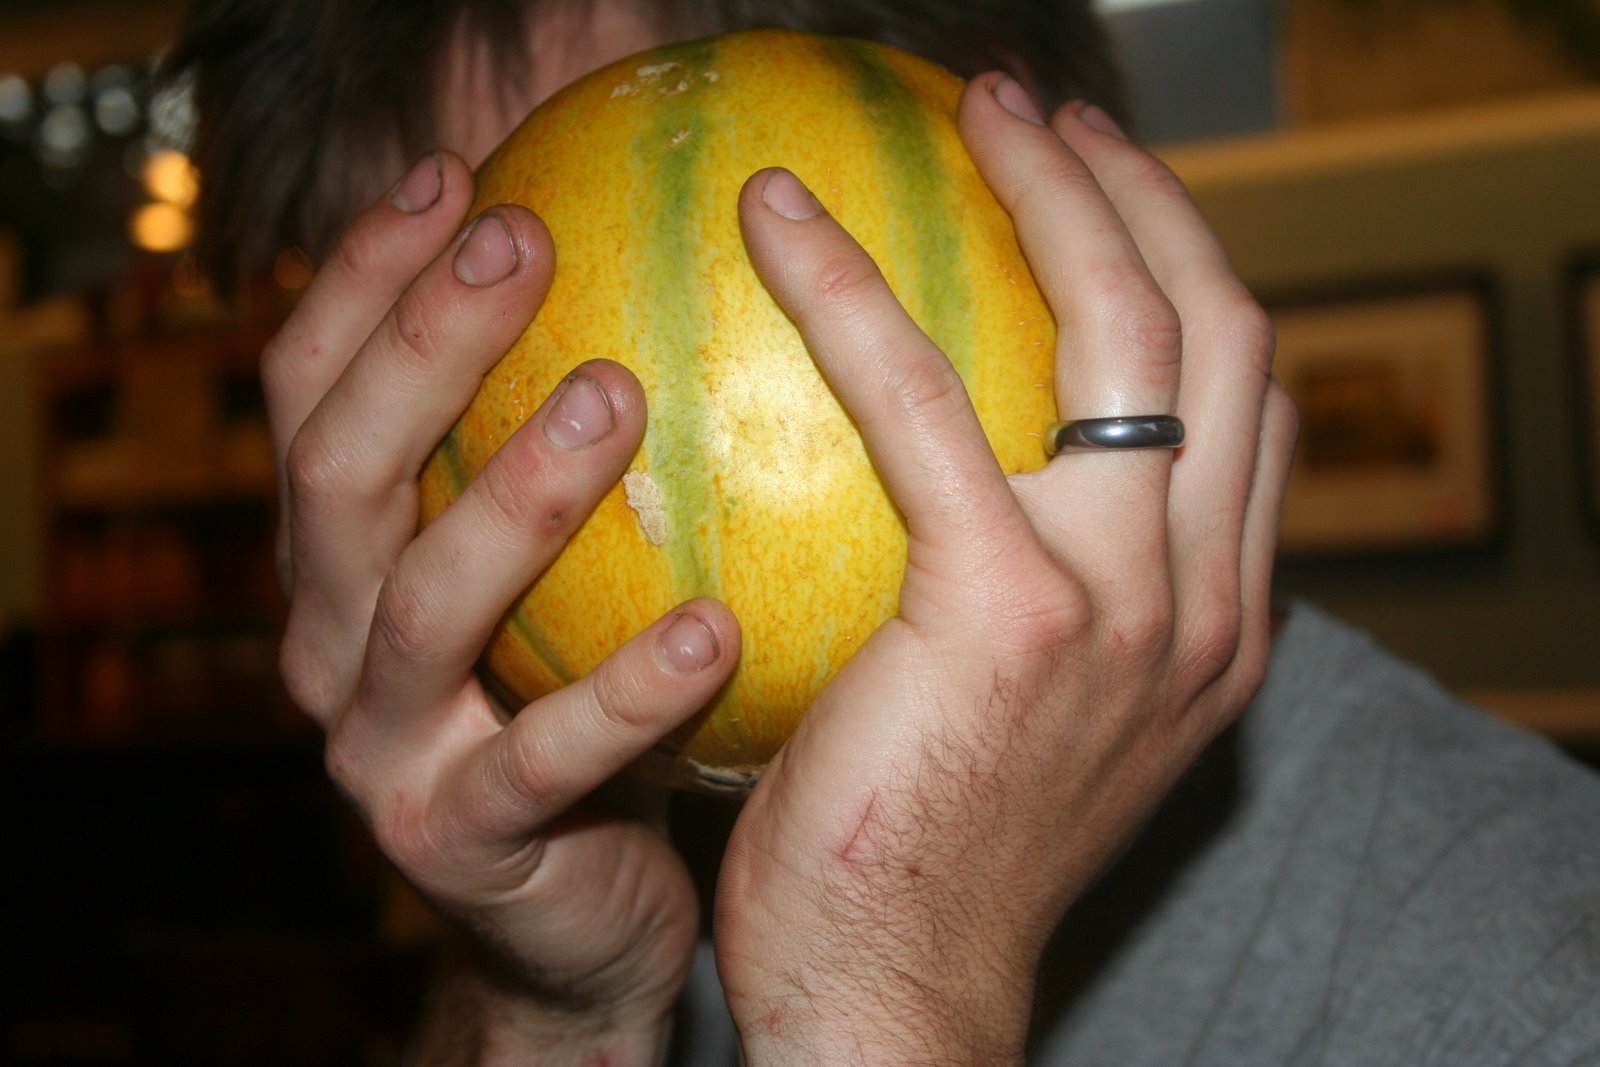 [Augies-+holding+the+melon+2.JPG]